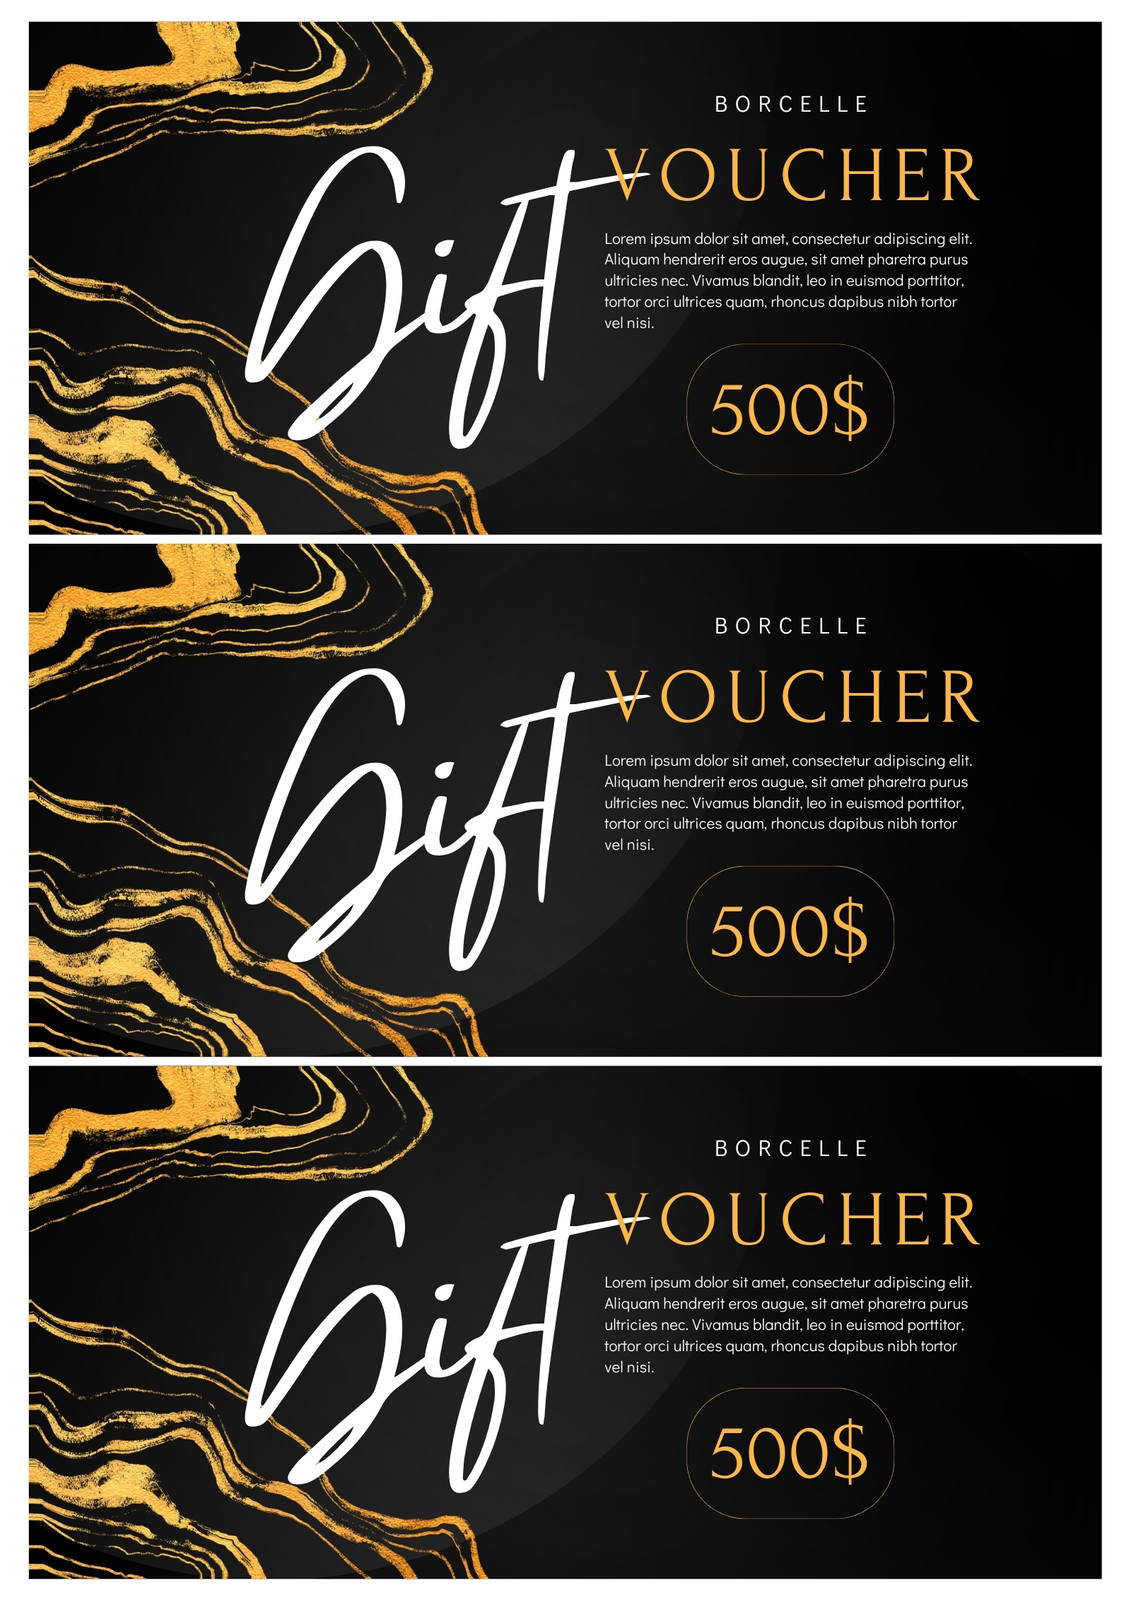 Gift coupon template elegant black white decor Vectors graphic art designs  in editable .ai .eps .svg .cdr format free and easy download unlimit  id:6846417